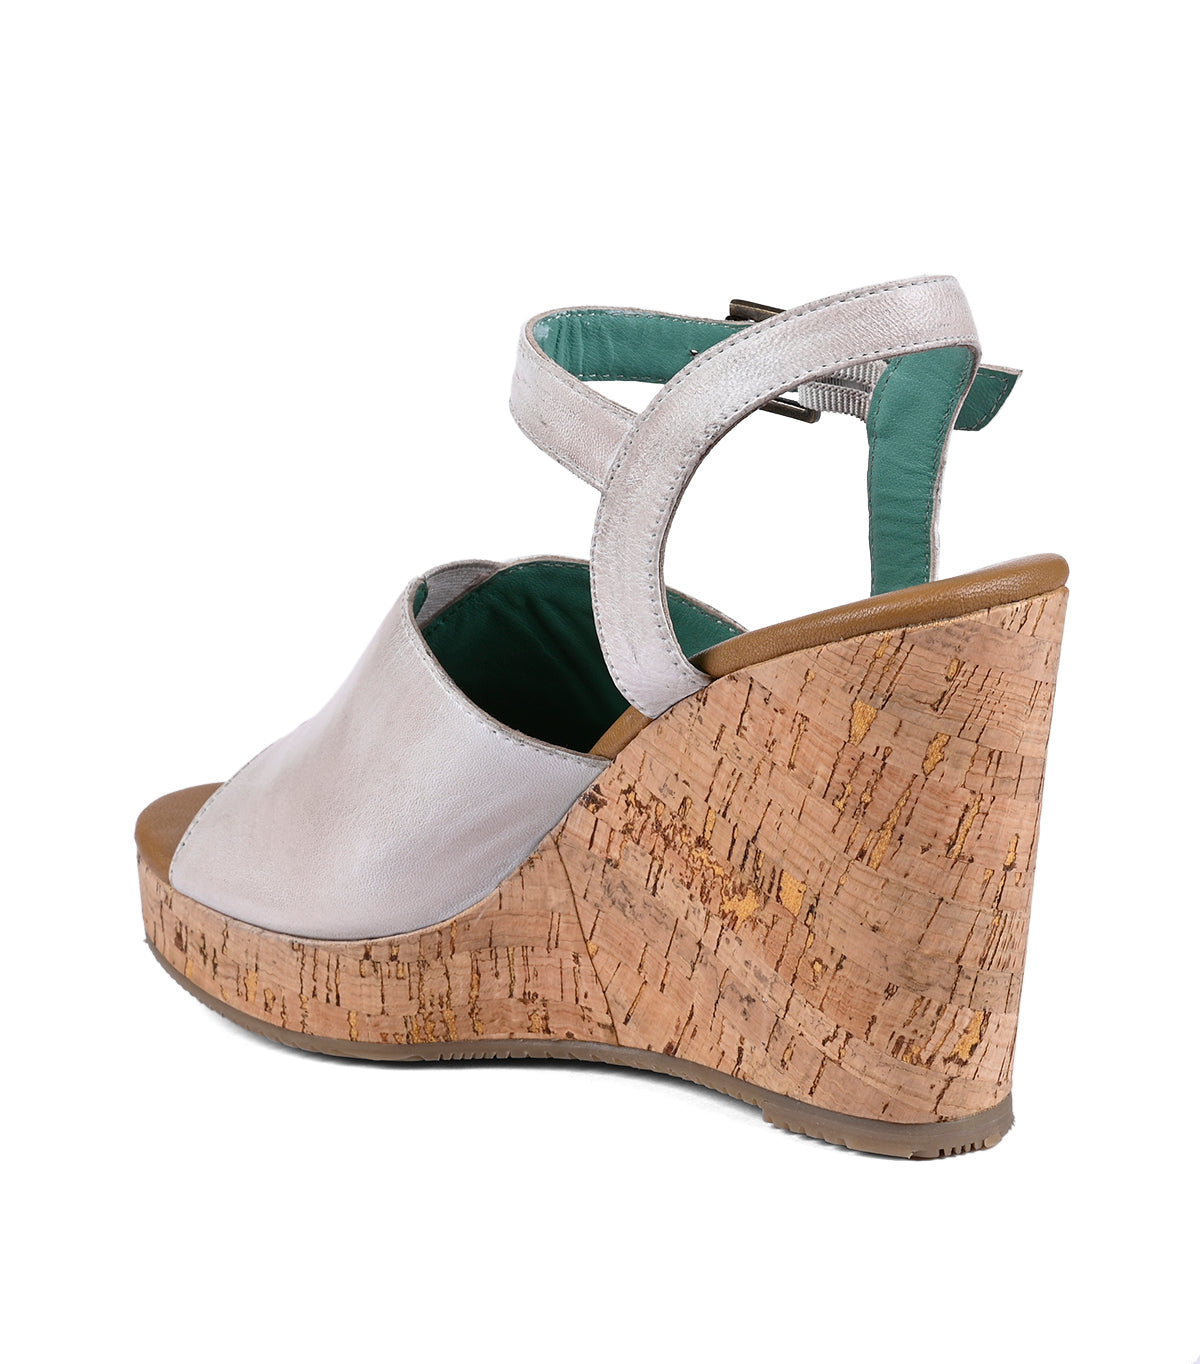 
                  
                    A women's beige and silver Deduction wedge heels sandal with a cork heel and a green interior, isolated on a white background.
                  
                